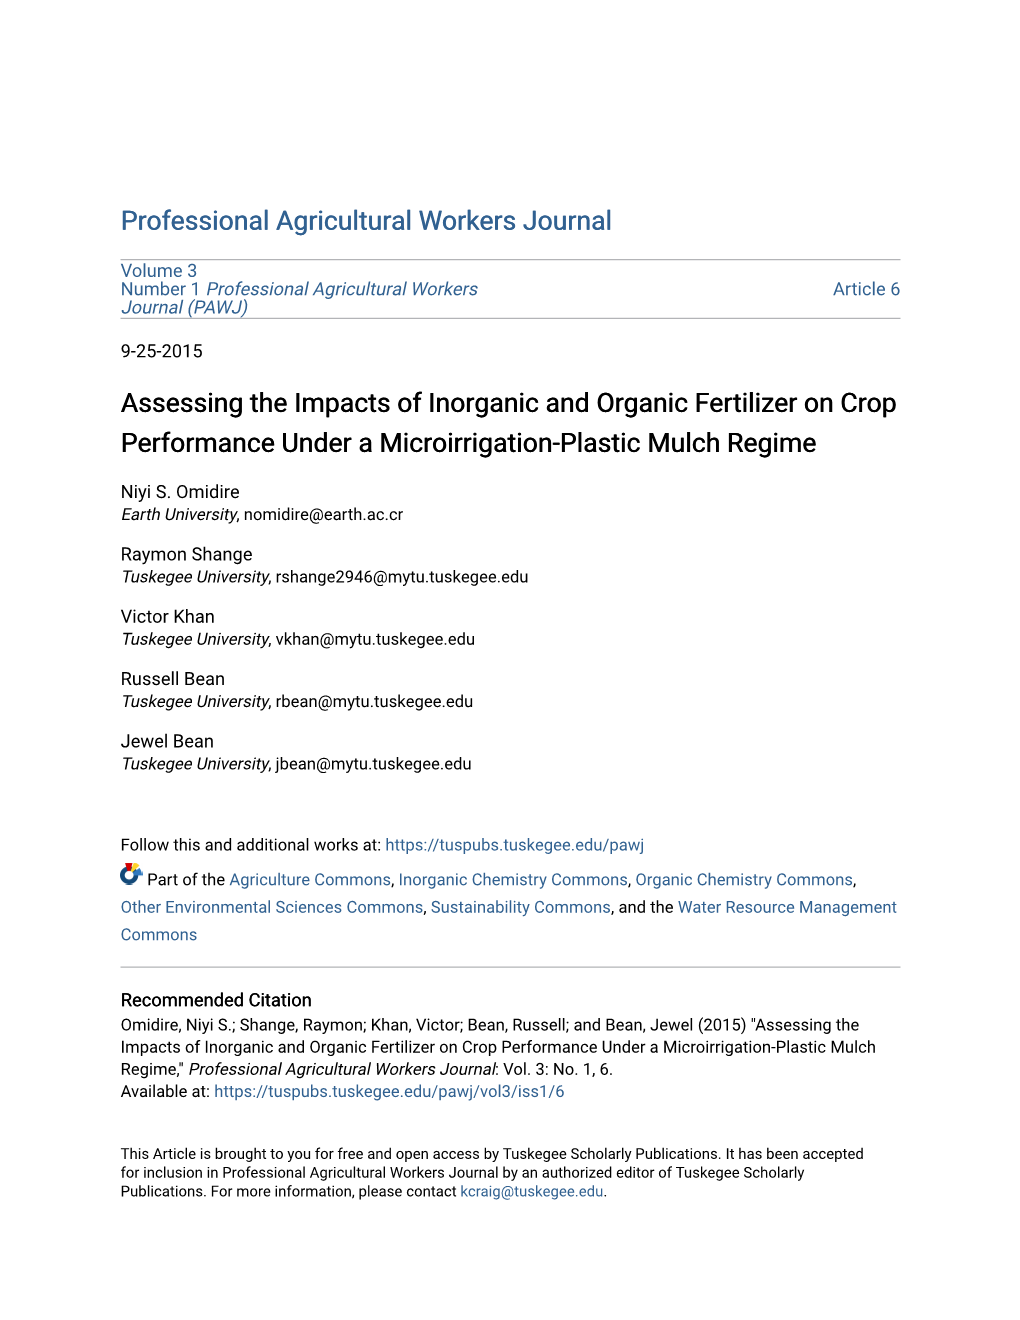 Assessing the Impacts of Inorganic and Organic Fertilizer on Crop Performance Under a Microirrigation-Plastic Mulch Regime